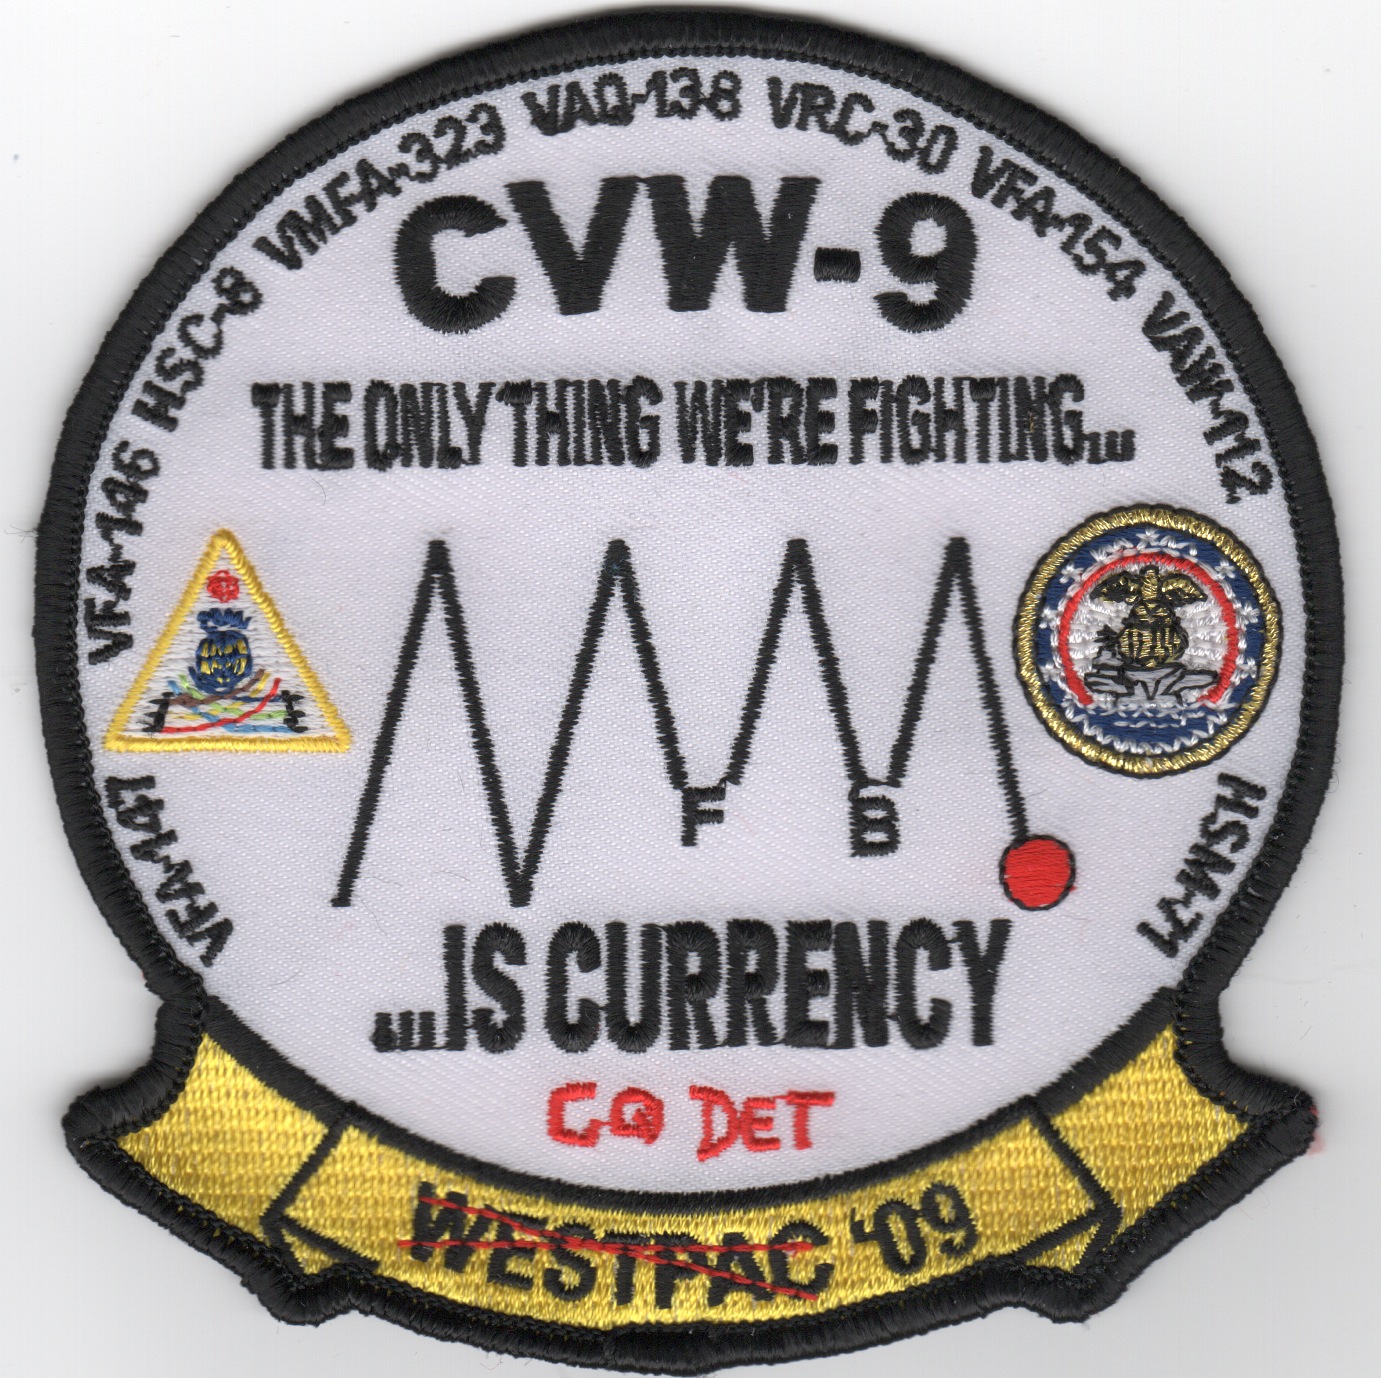 CVW-9 'Currency' Patch